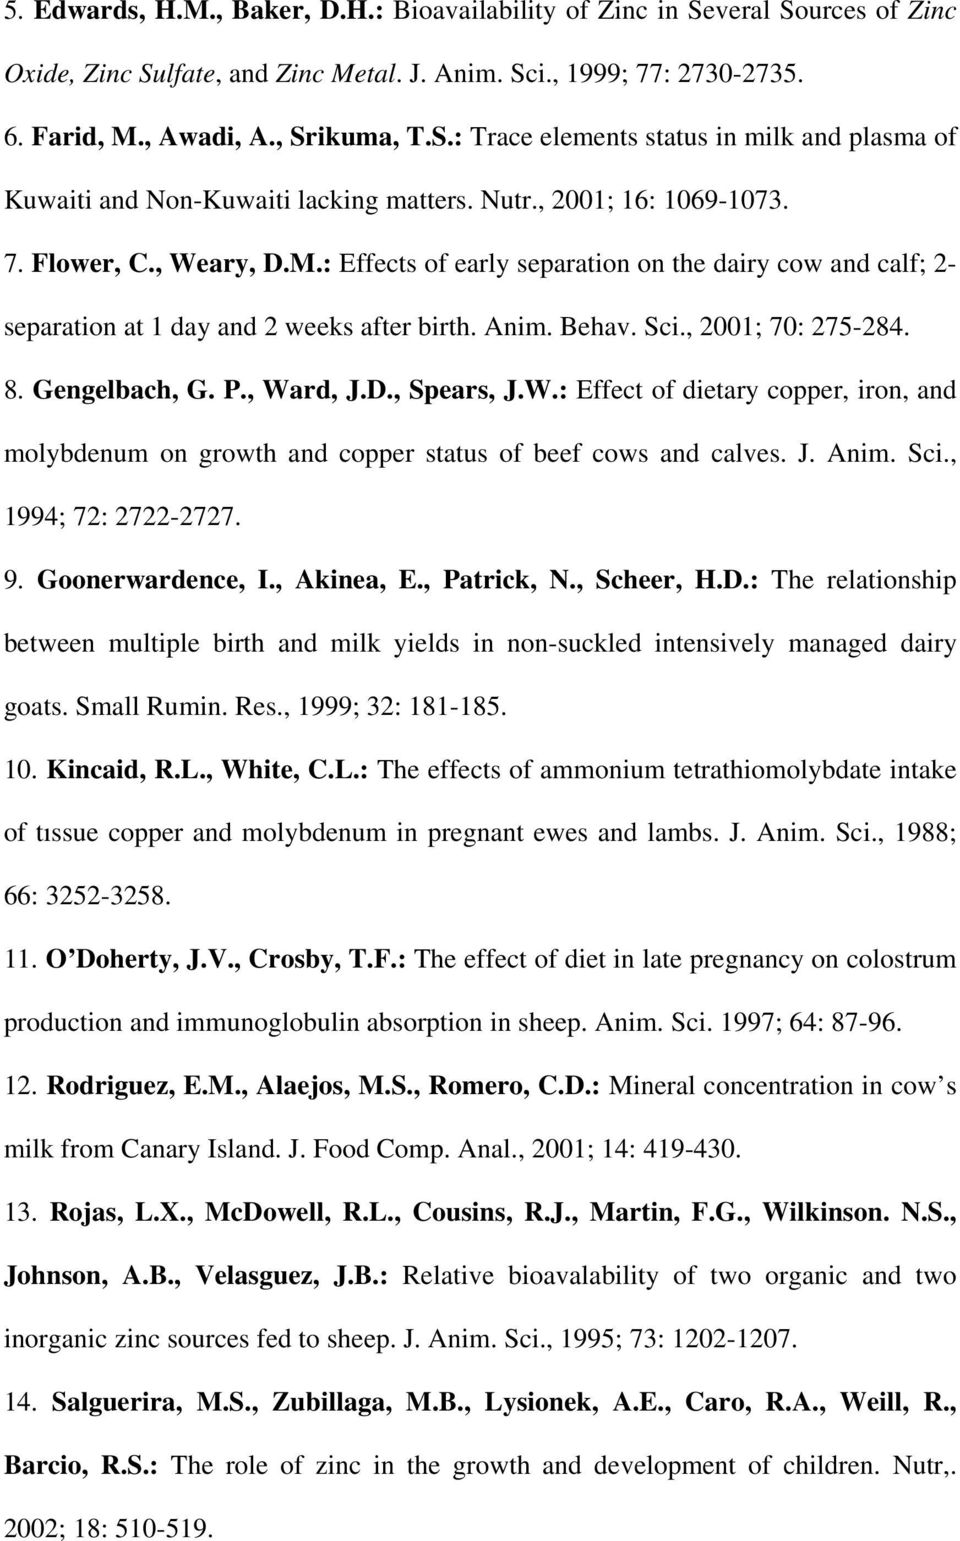 Gengelbach, G. P., Ward, J.D., Spears, J.W.: Effect of dietary copper, iron, and molybdenum on growth and copper status of beef cows and calves. J. Anim. Sci., 1994; 72: 2722-2727. 9.